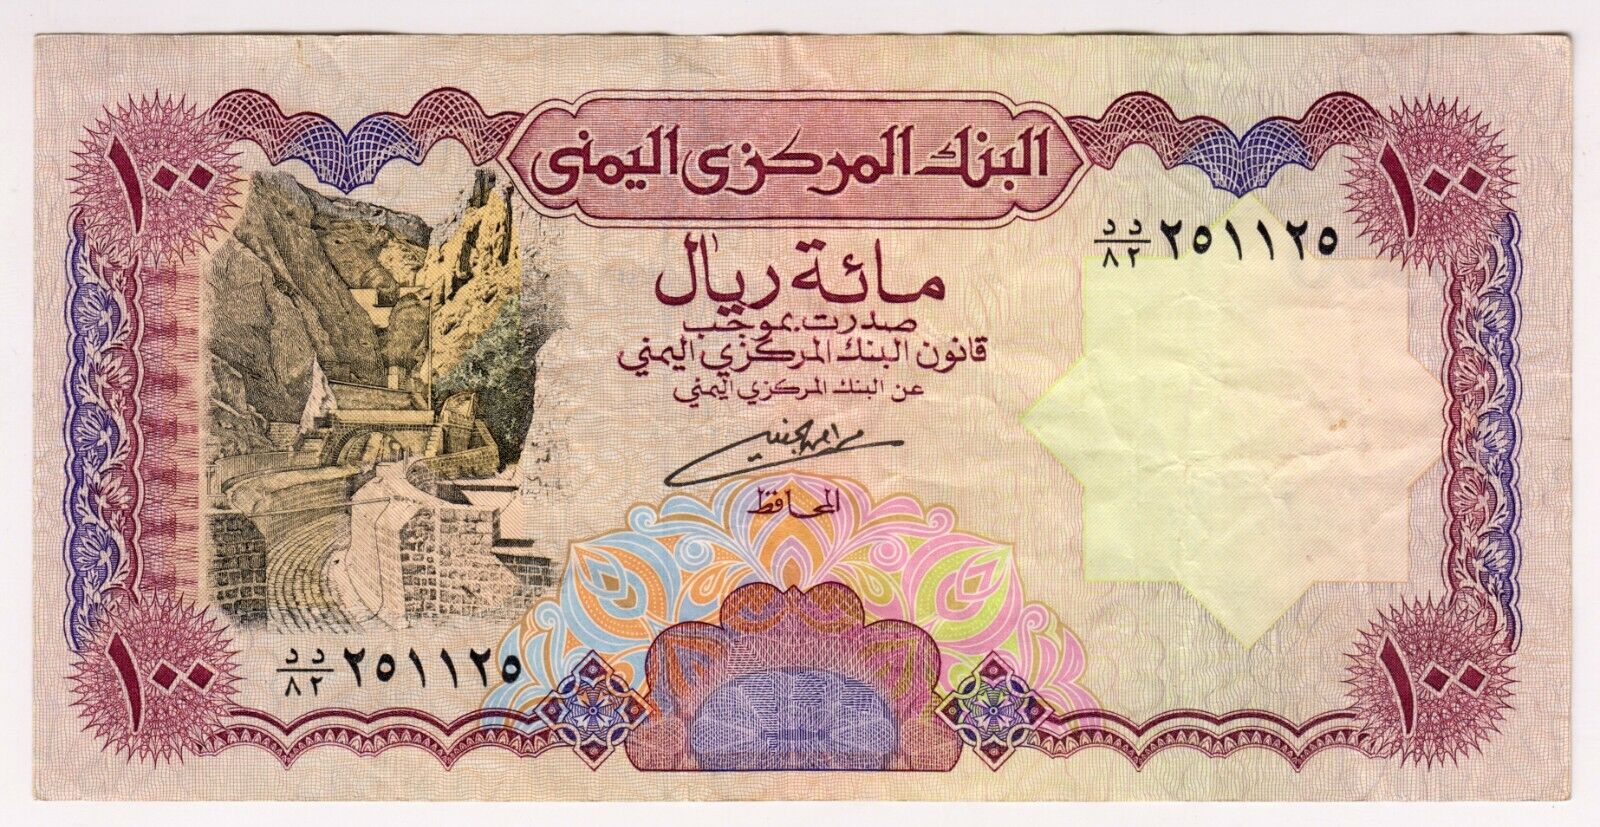 1990 Yemen 100 Rials Paper Money Banknotes Currency.